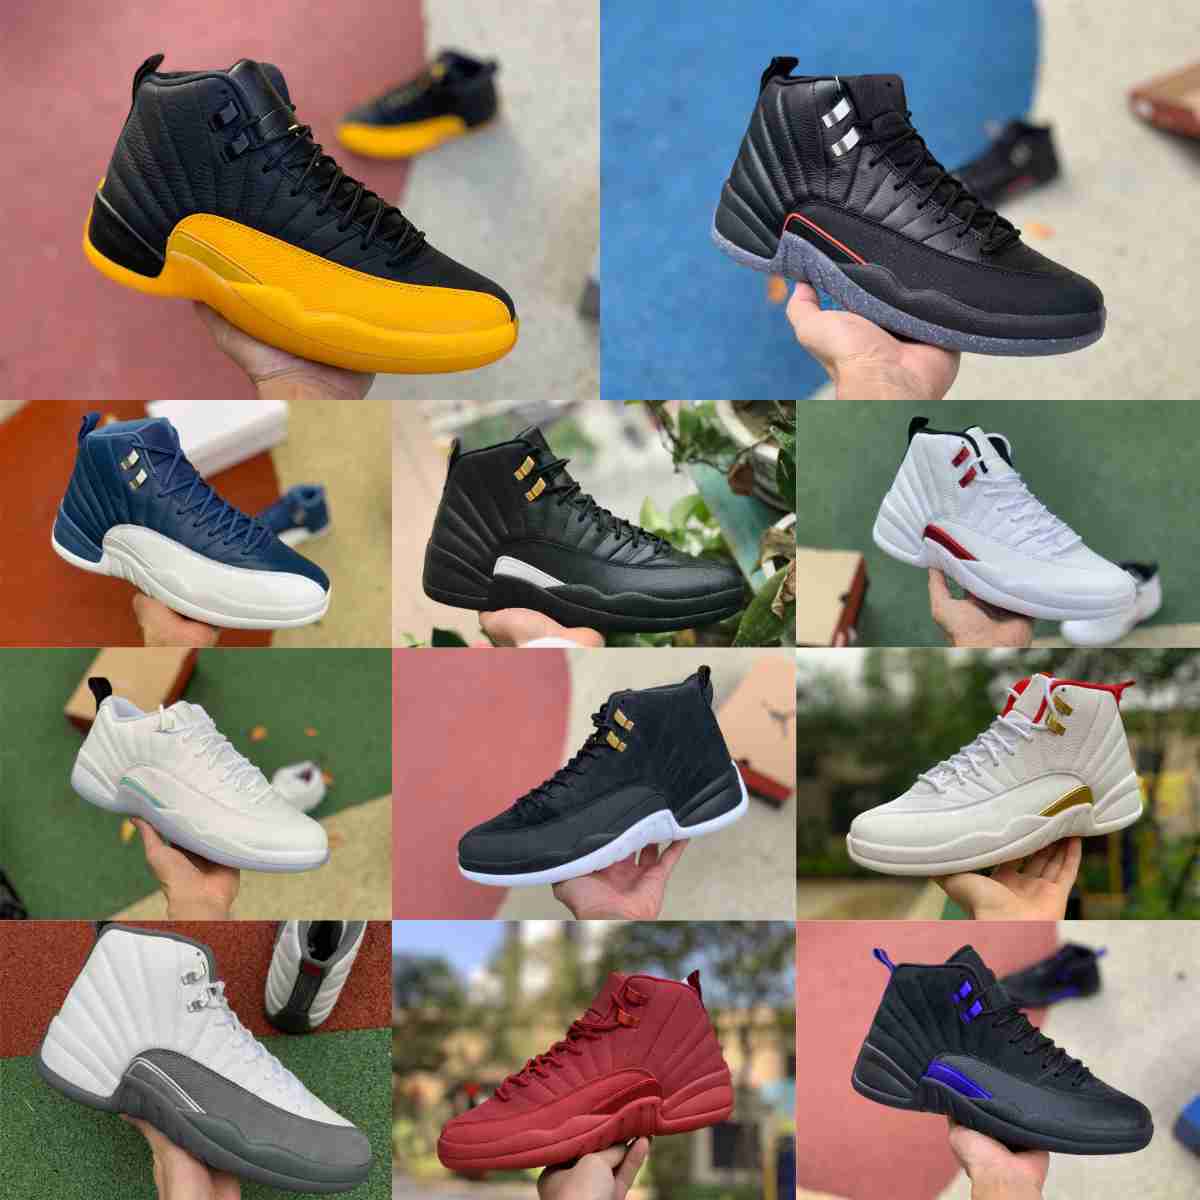 2023 Jumpman Utility Grind 12 12s Mens High Basketball Shoes Twist Gold Indigo Taxi Fiba Gamma Blue Flu Game Dark Concord Royalty OVO White The Master Trainer Sneakers